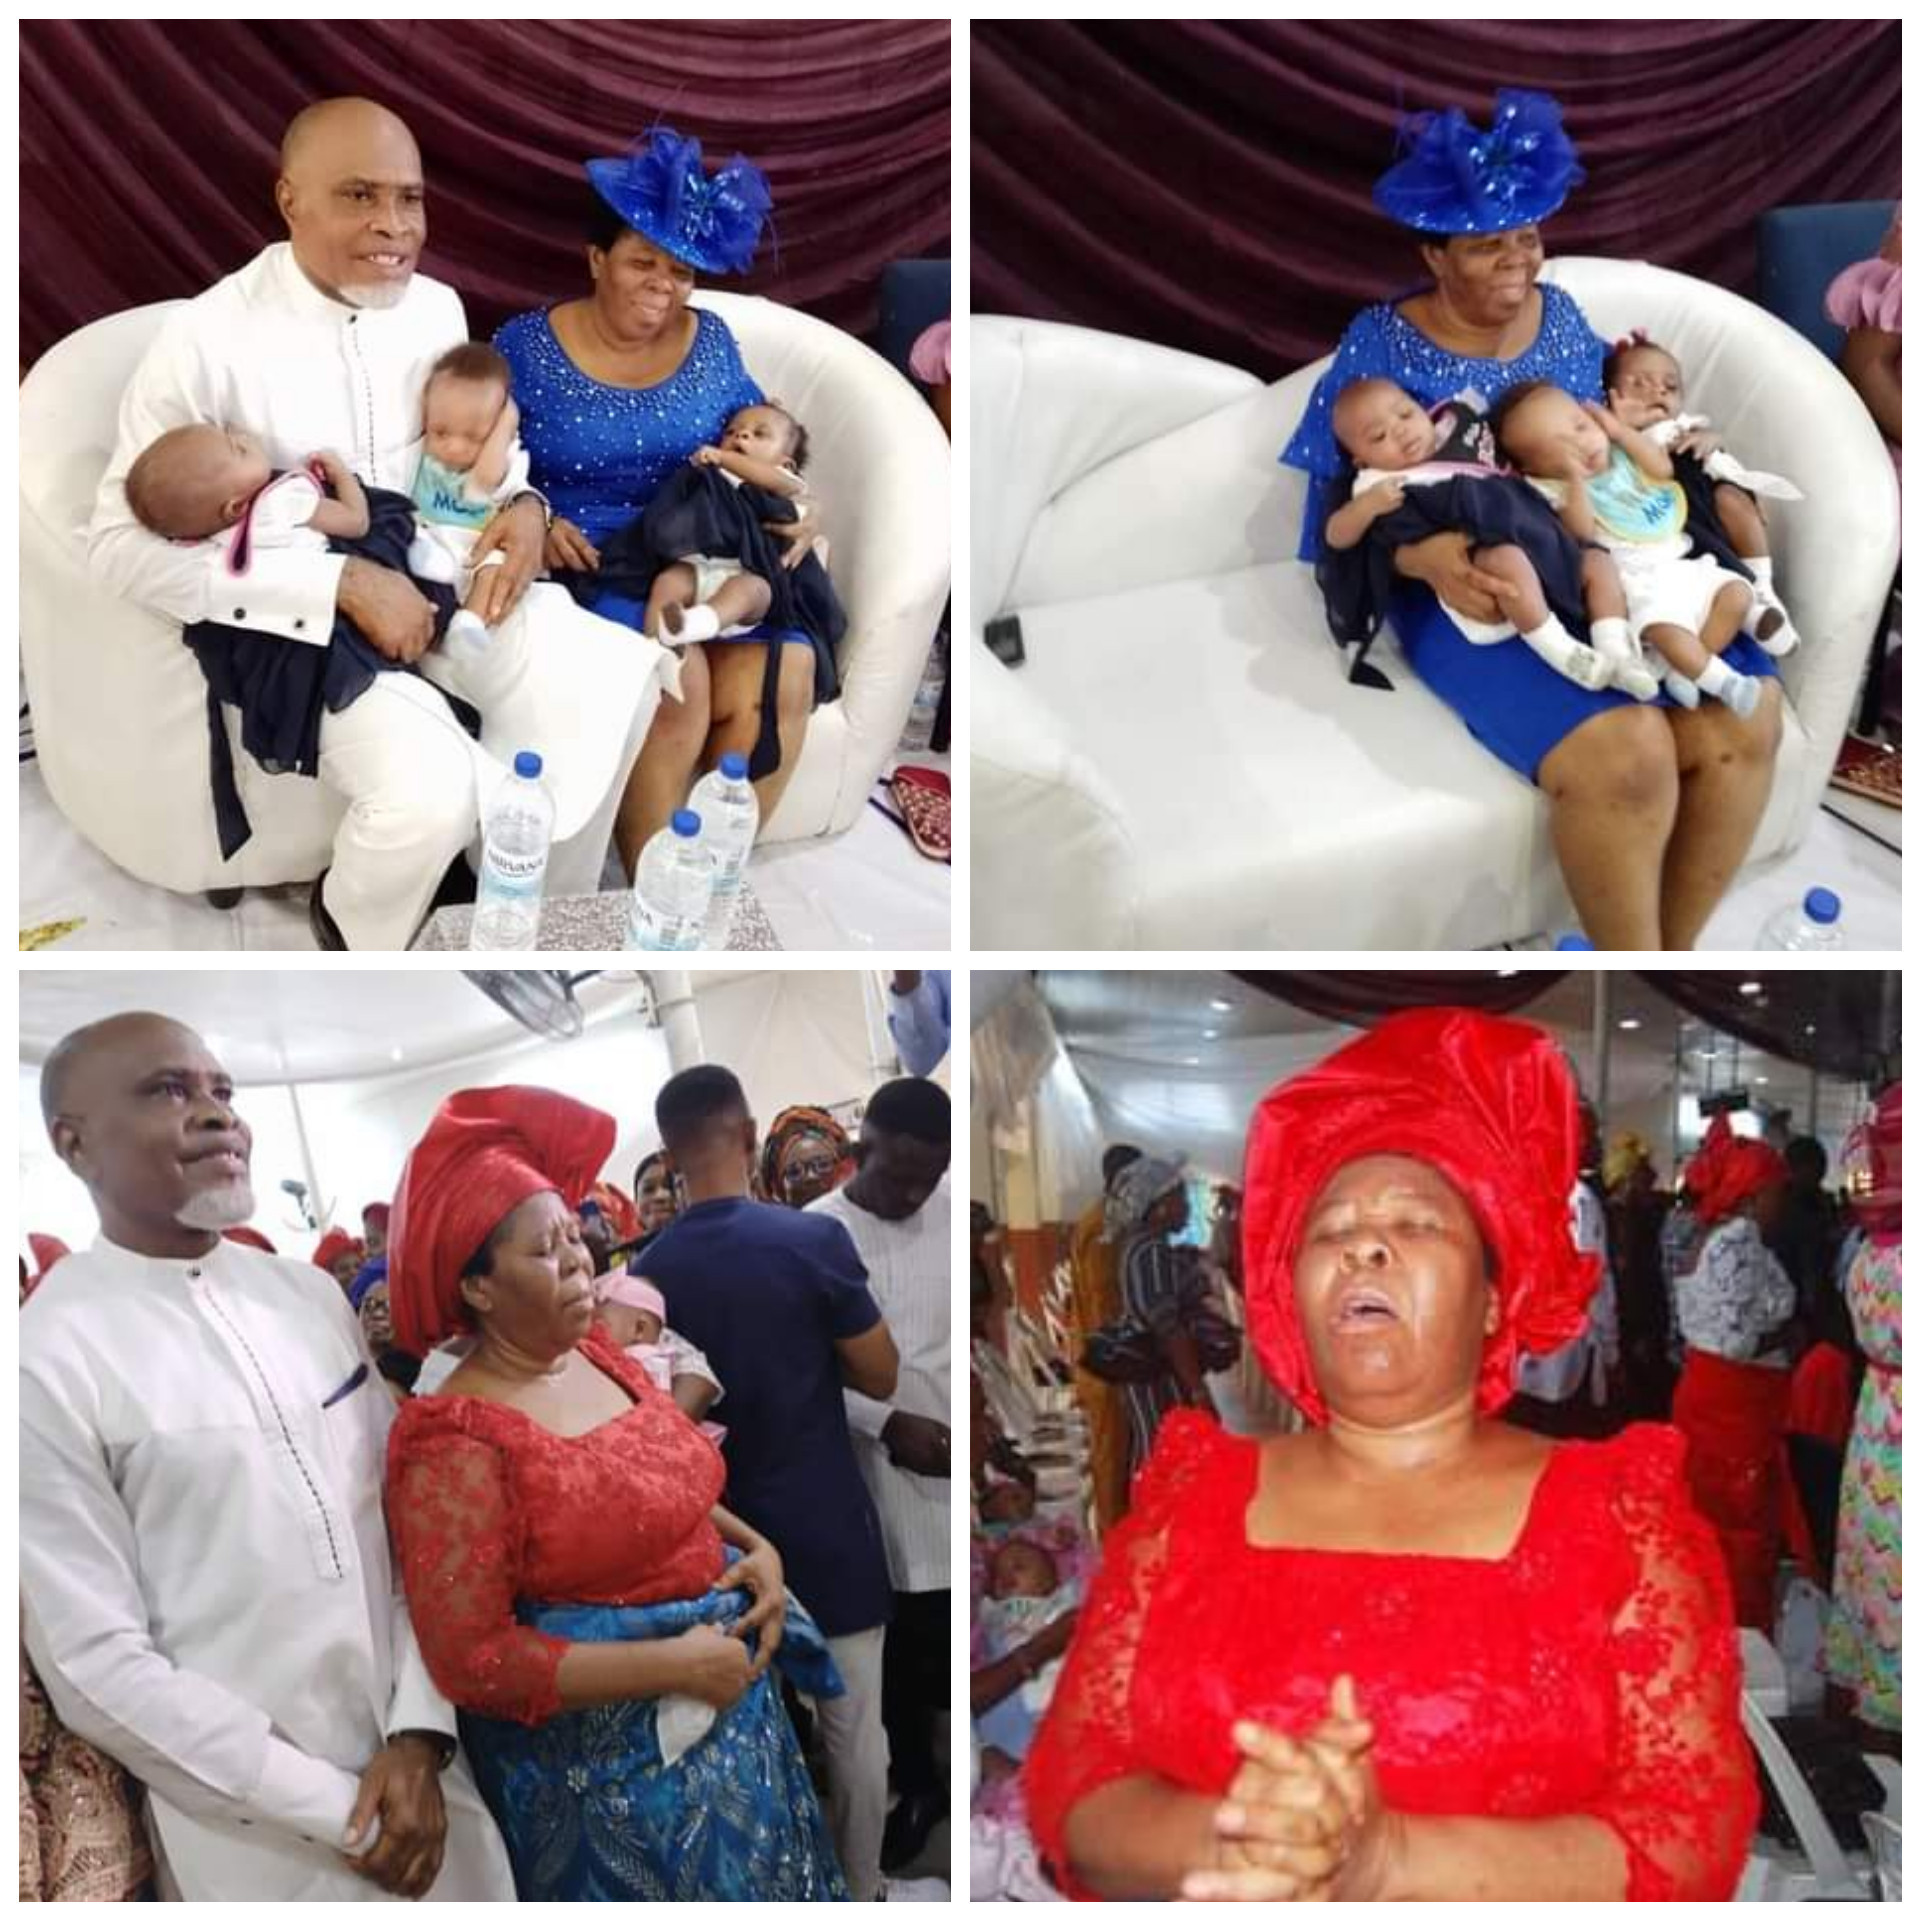 “WE MARRIED AS VIRGINS” – NIGERIAN COUPLE WHO WELCOMED TRIPLETS AFTER 25 YEARS OF MARRIAGE OPENS UP ABOUT THEIR STRUGGLES AND TRIUMPH